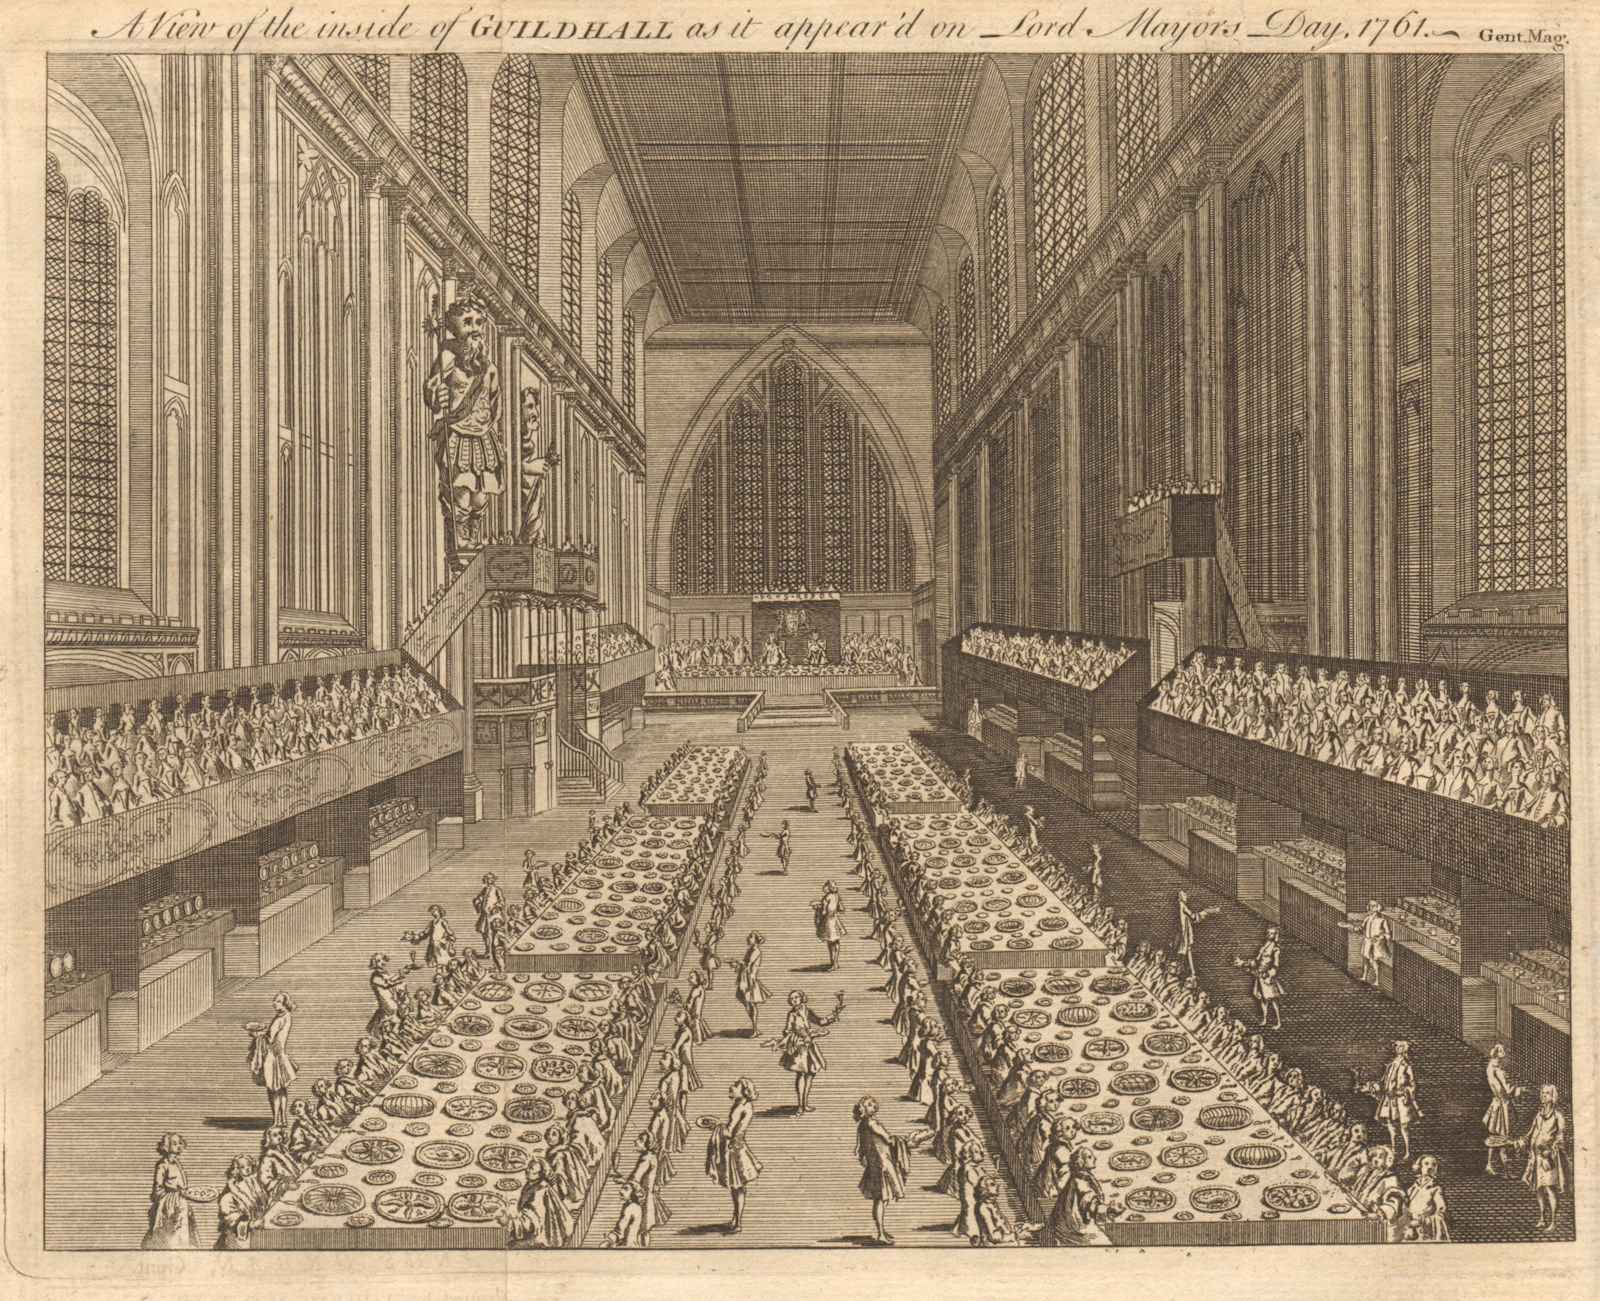 The inside of Guildhall as it appeared on Lord Mayors Day, 1761. London 1761